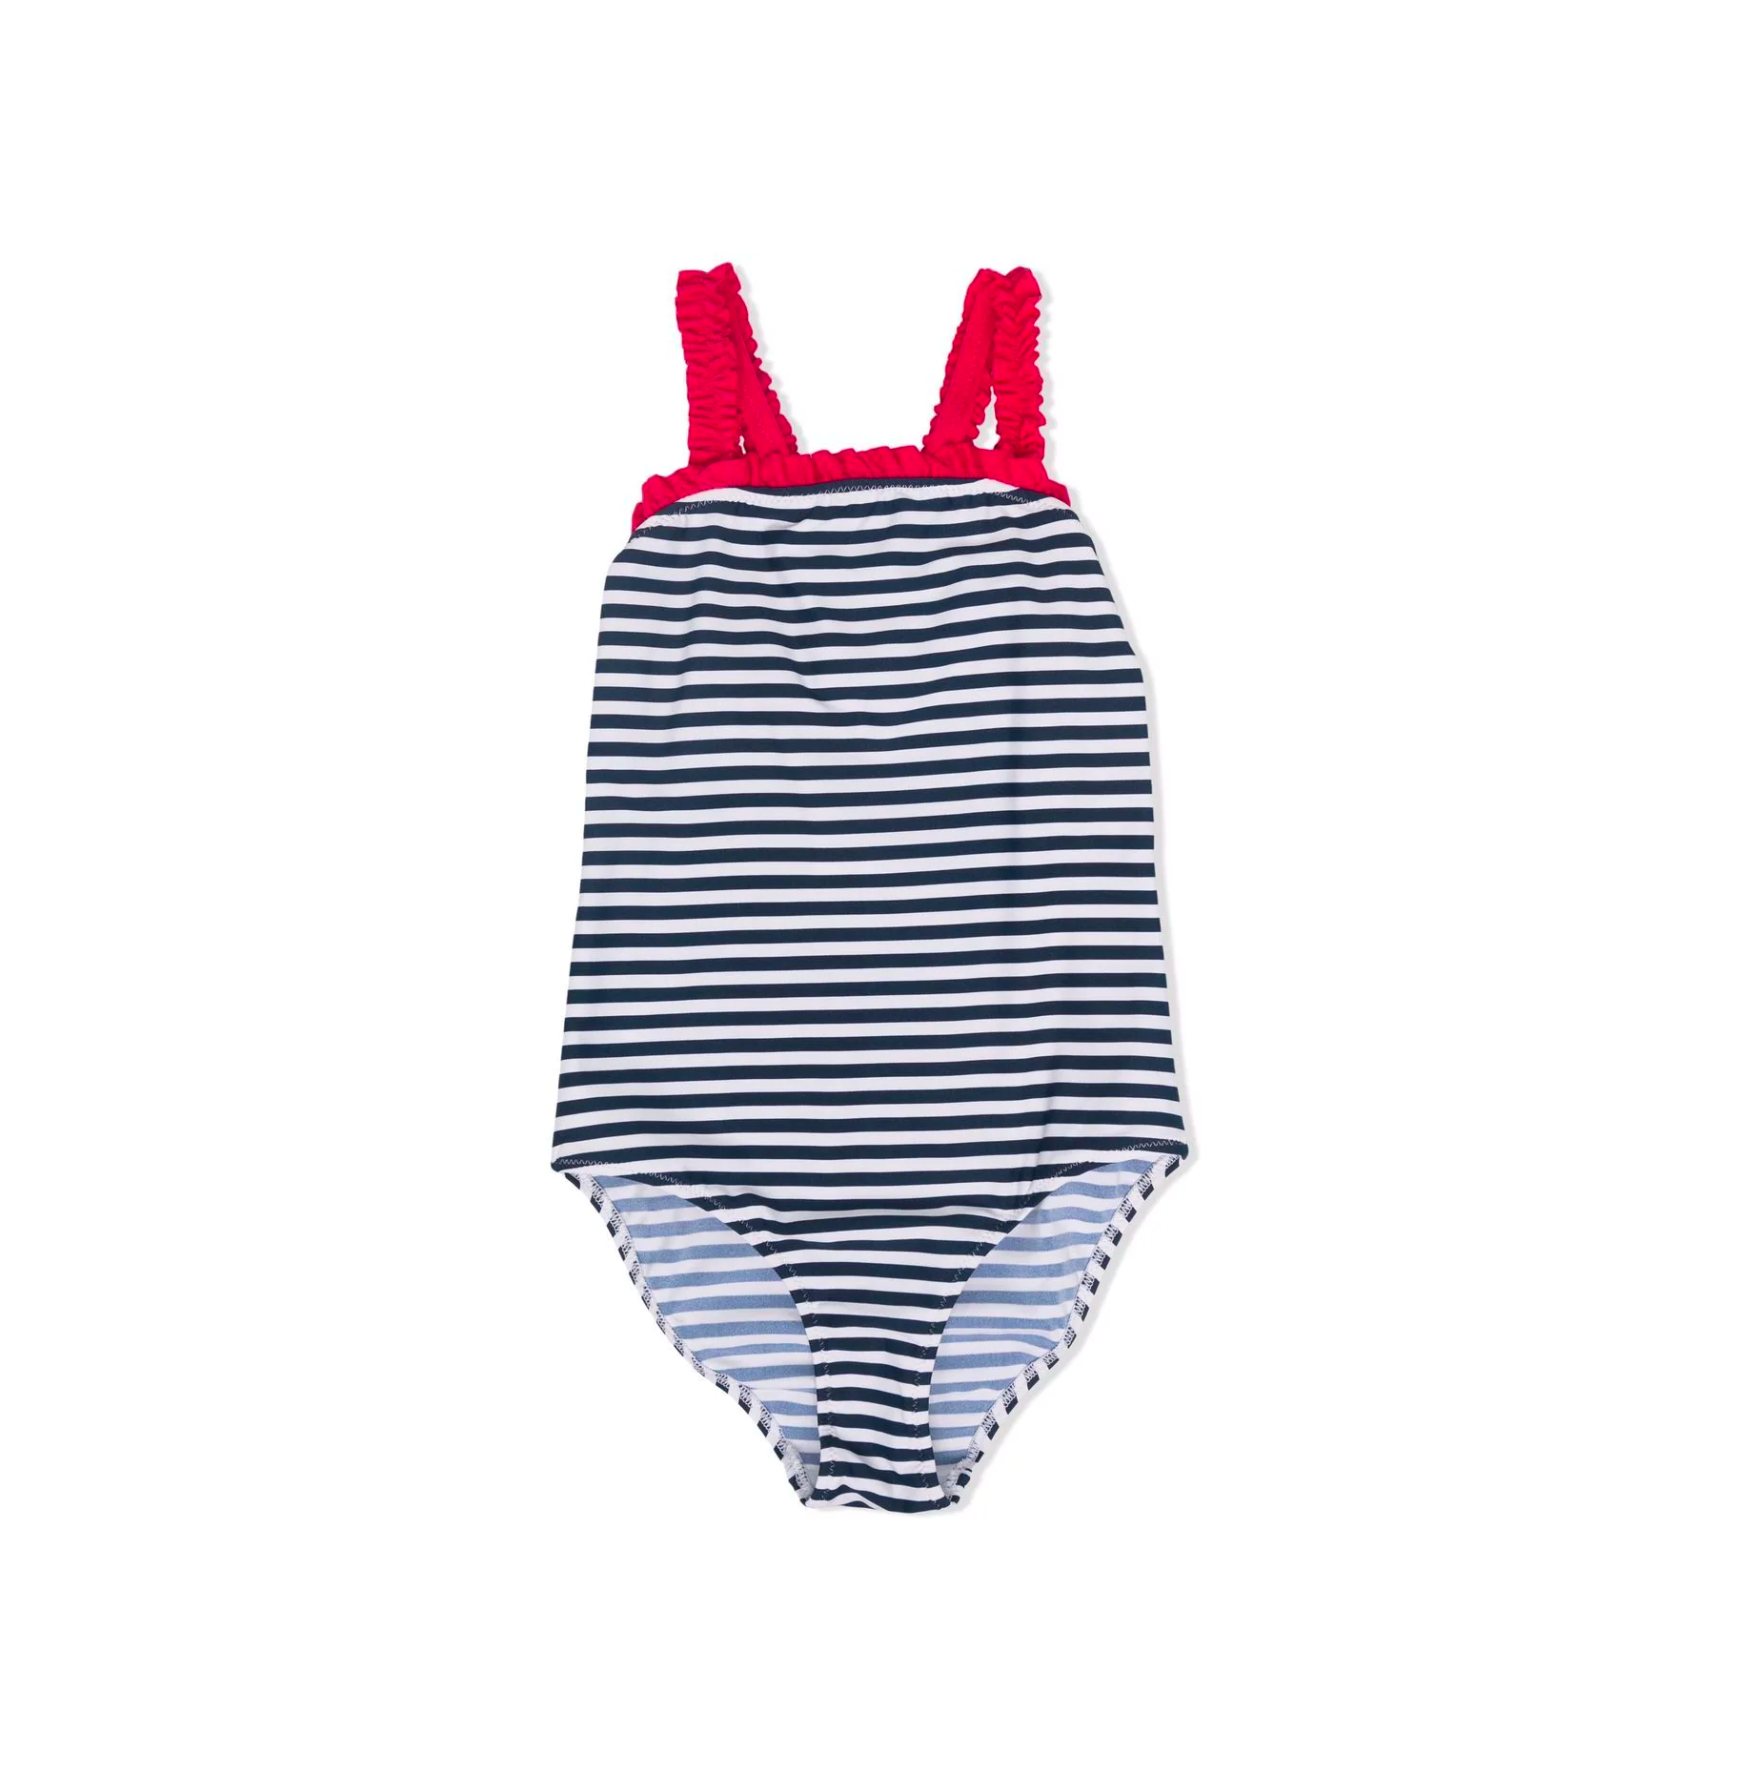 IL GUFO – One-piece swimsuit - 2 years old